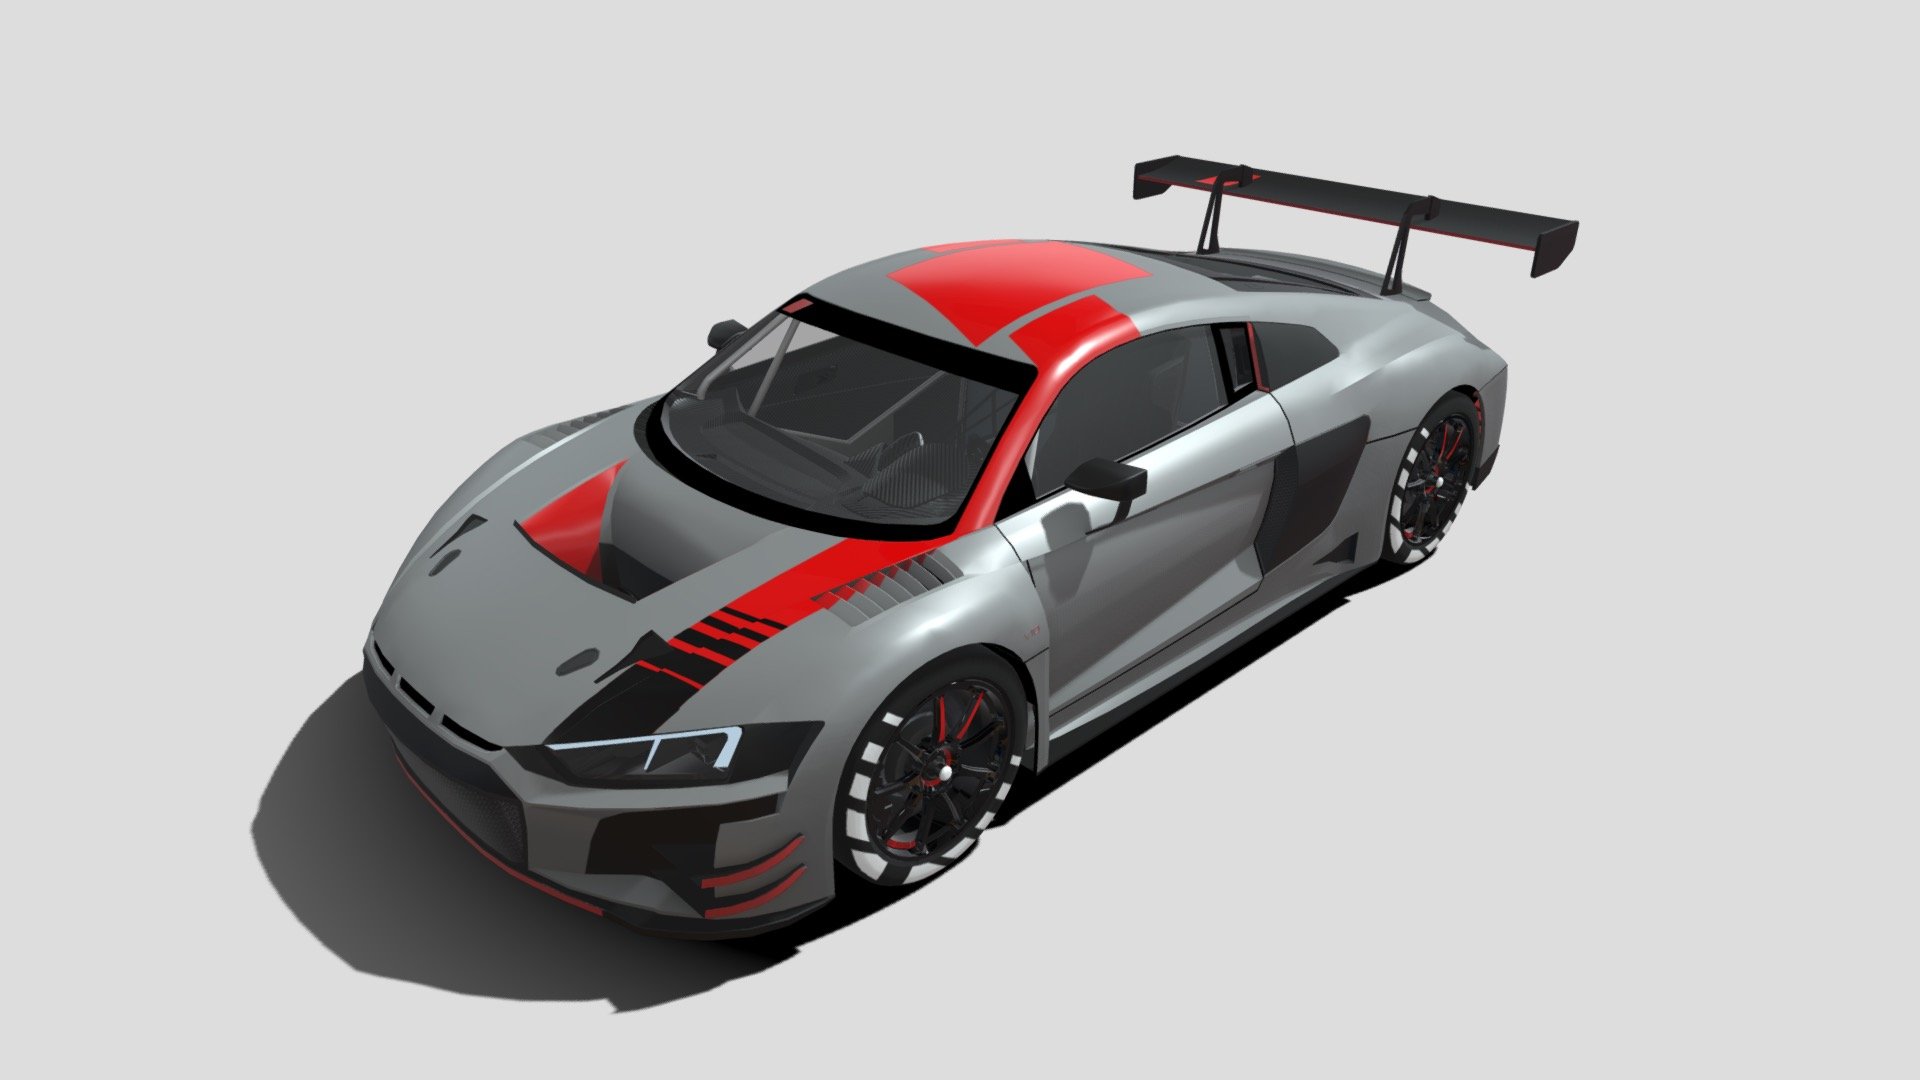 LowPoly model of race car Audi - R8 GT3 2019 with 4k textures, fitted for mobile games and apps - Audi - R8 GT3 LMS - 3D model by mrDiG 3d model